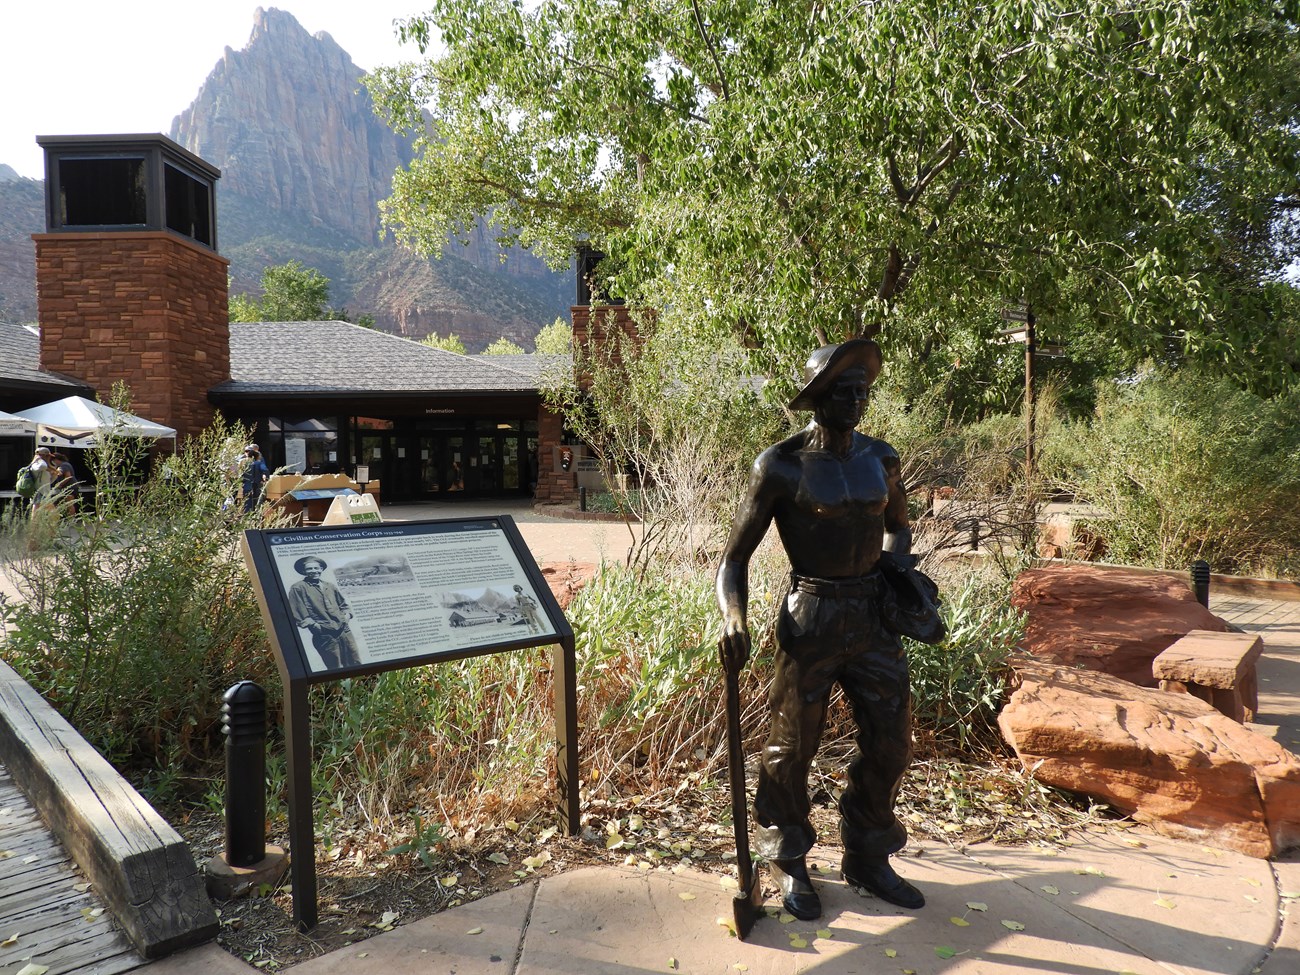 This statue, dedicated in 2016, commemorates the work of the CCC enrollees who were critical in creating much of the infrastructure for Zion National Park. It currently stands in front of the park’s Visitor Center. NPS Photo.